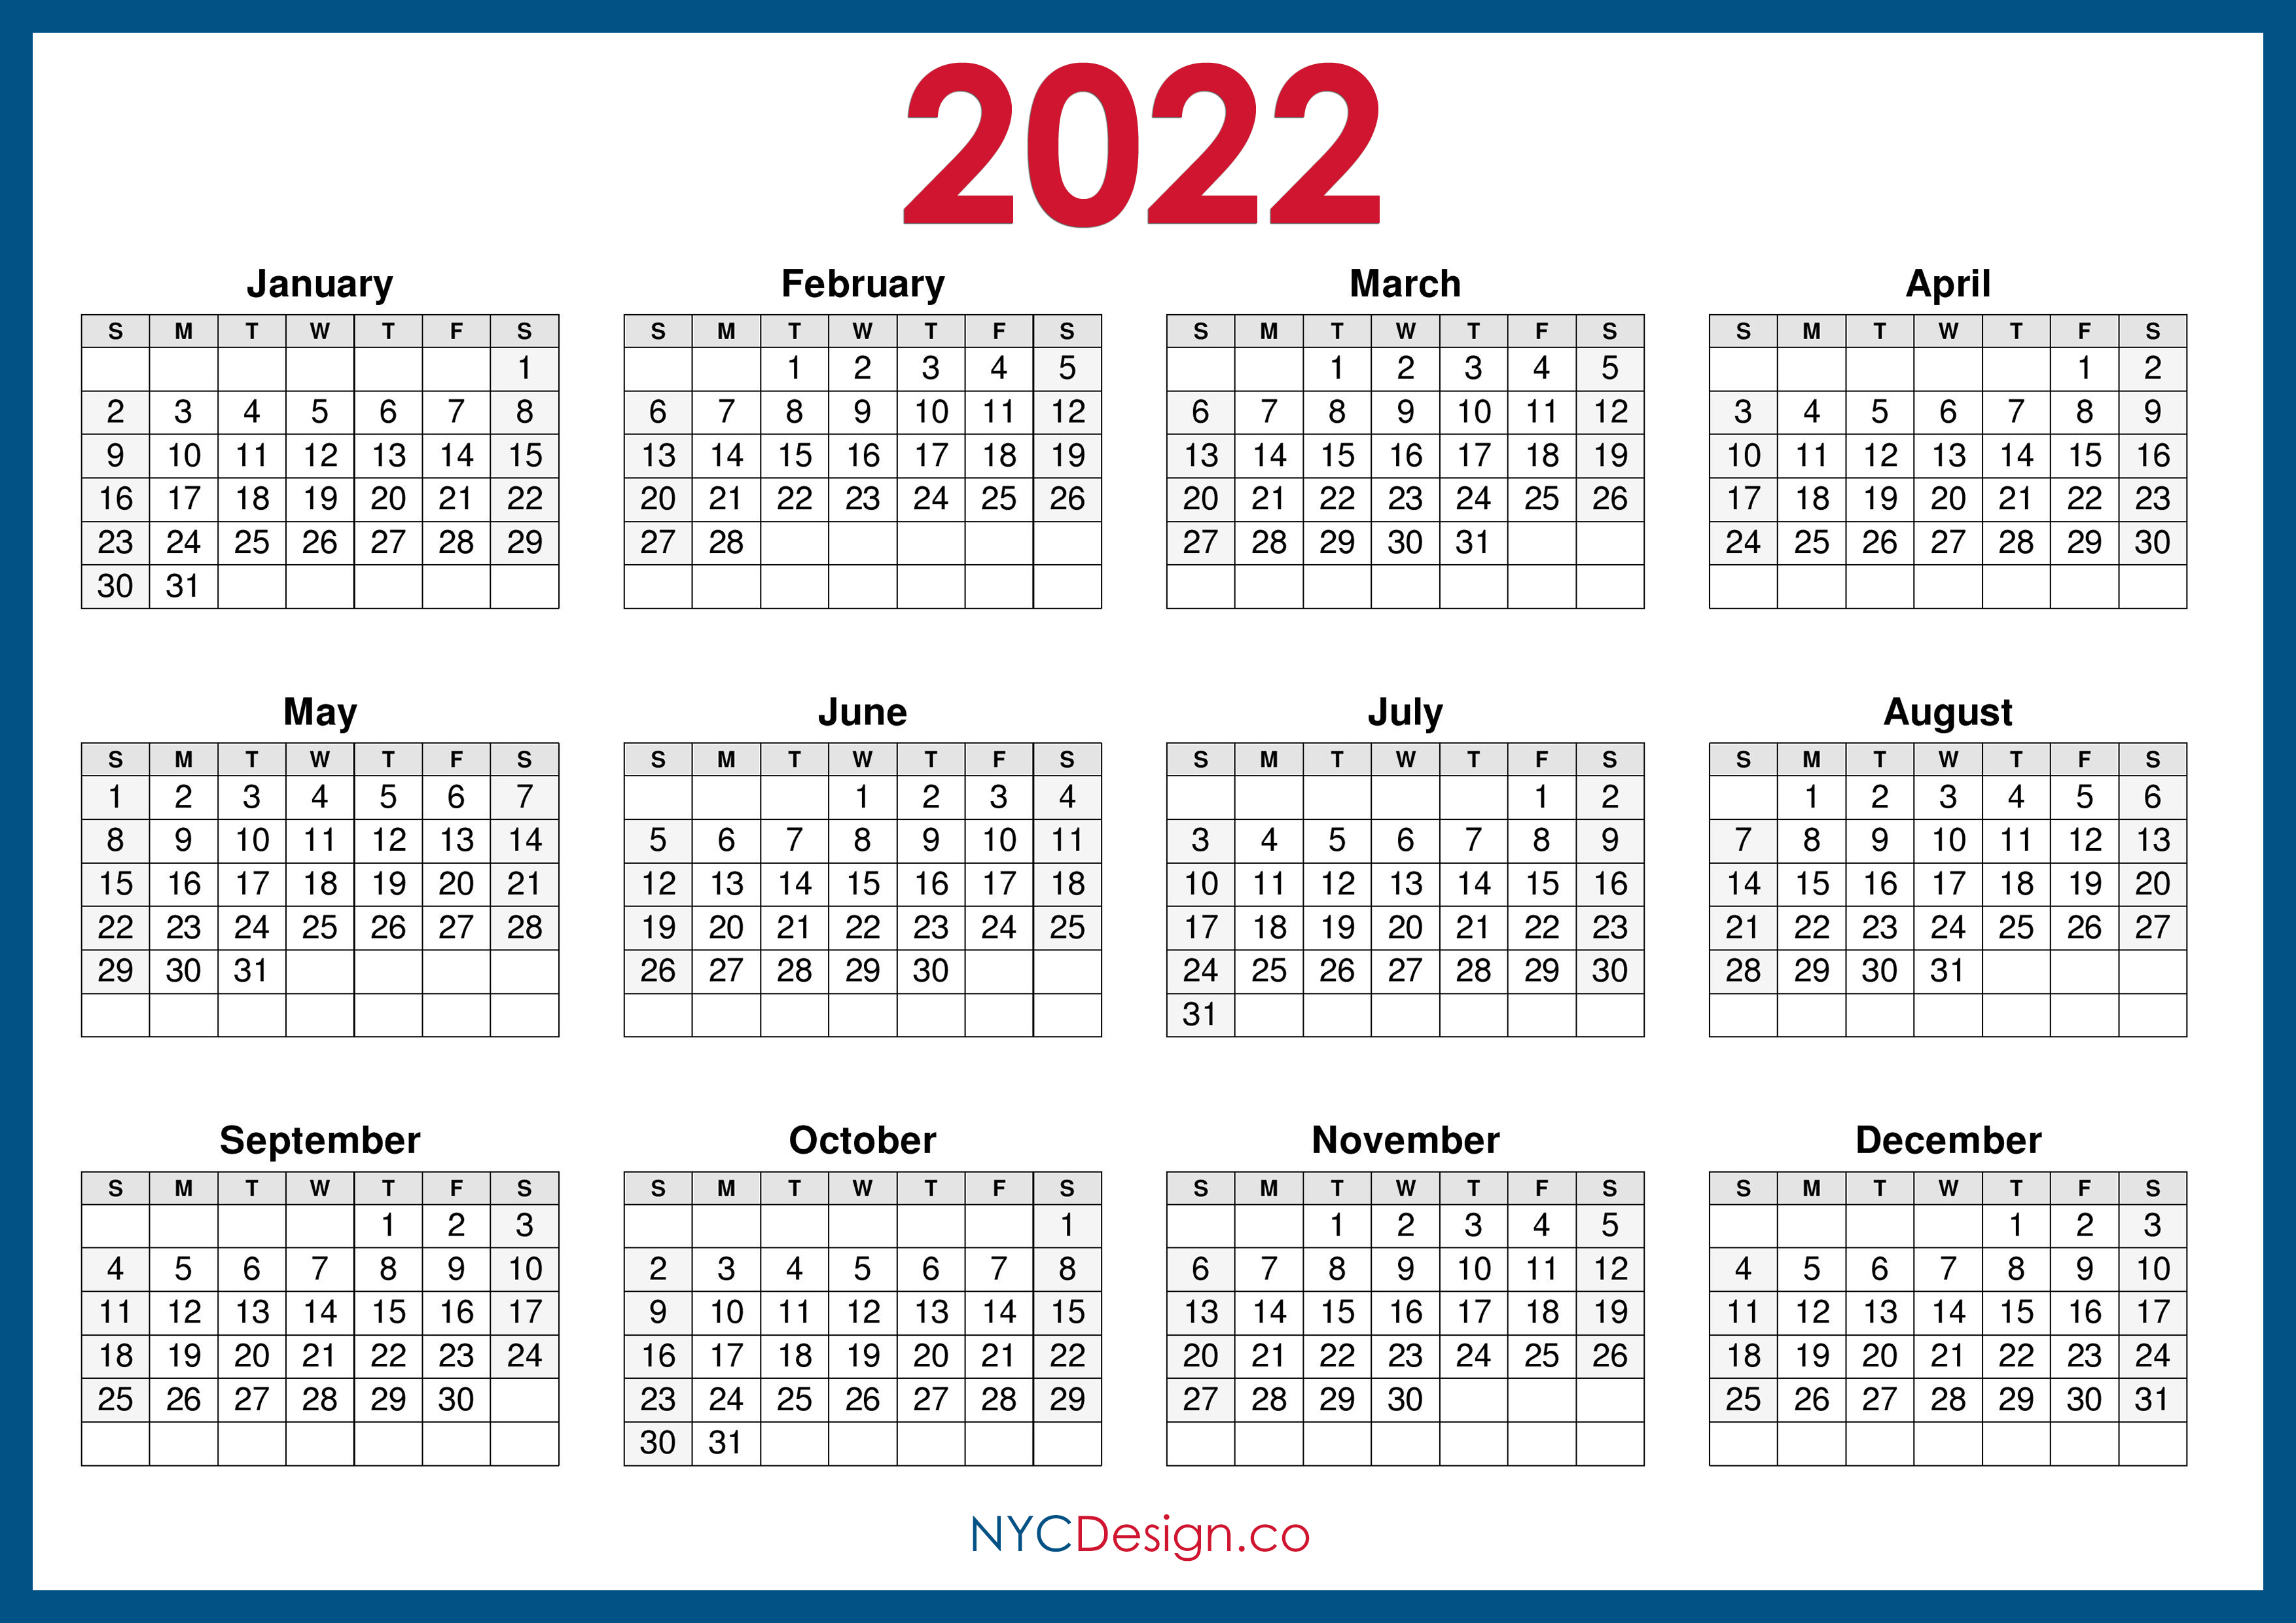 free-downloadable-2022-monthly-calendar-nawswing